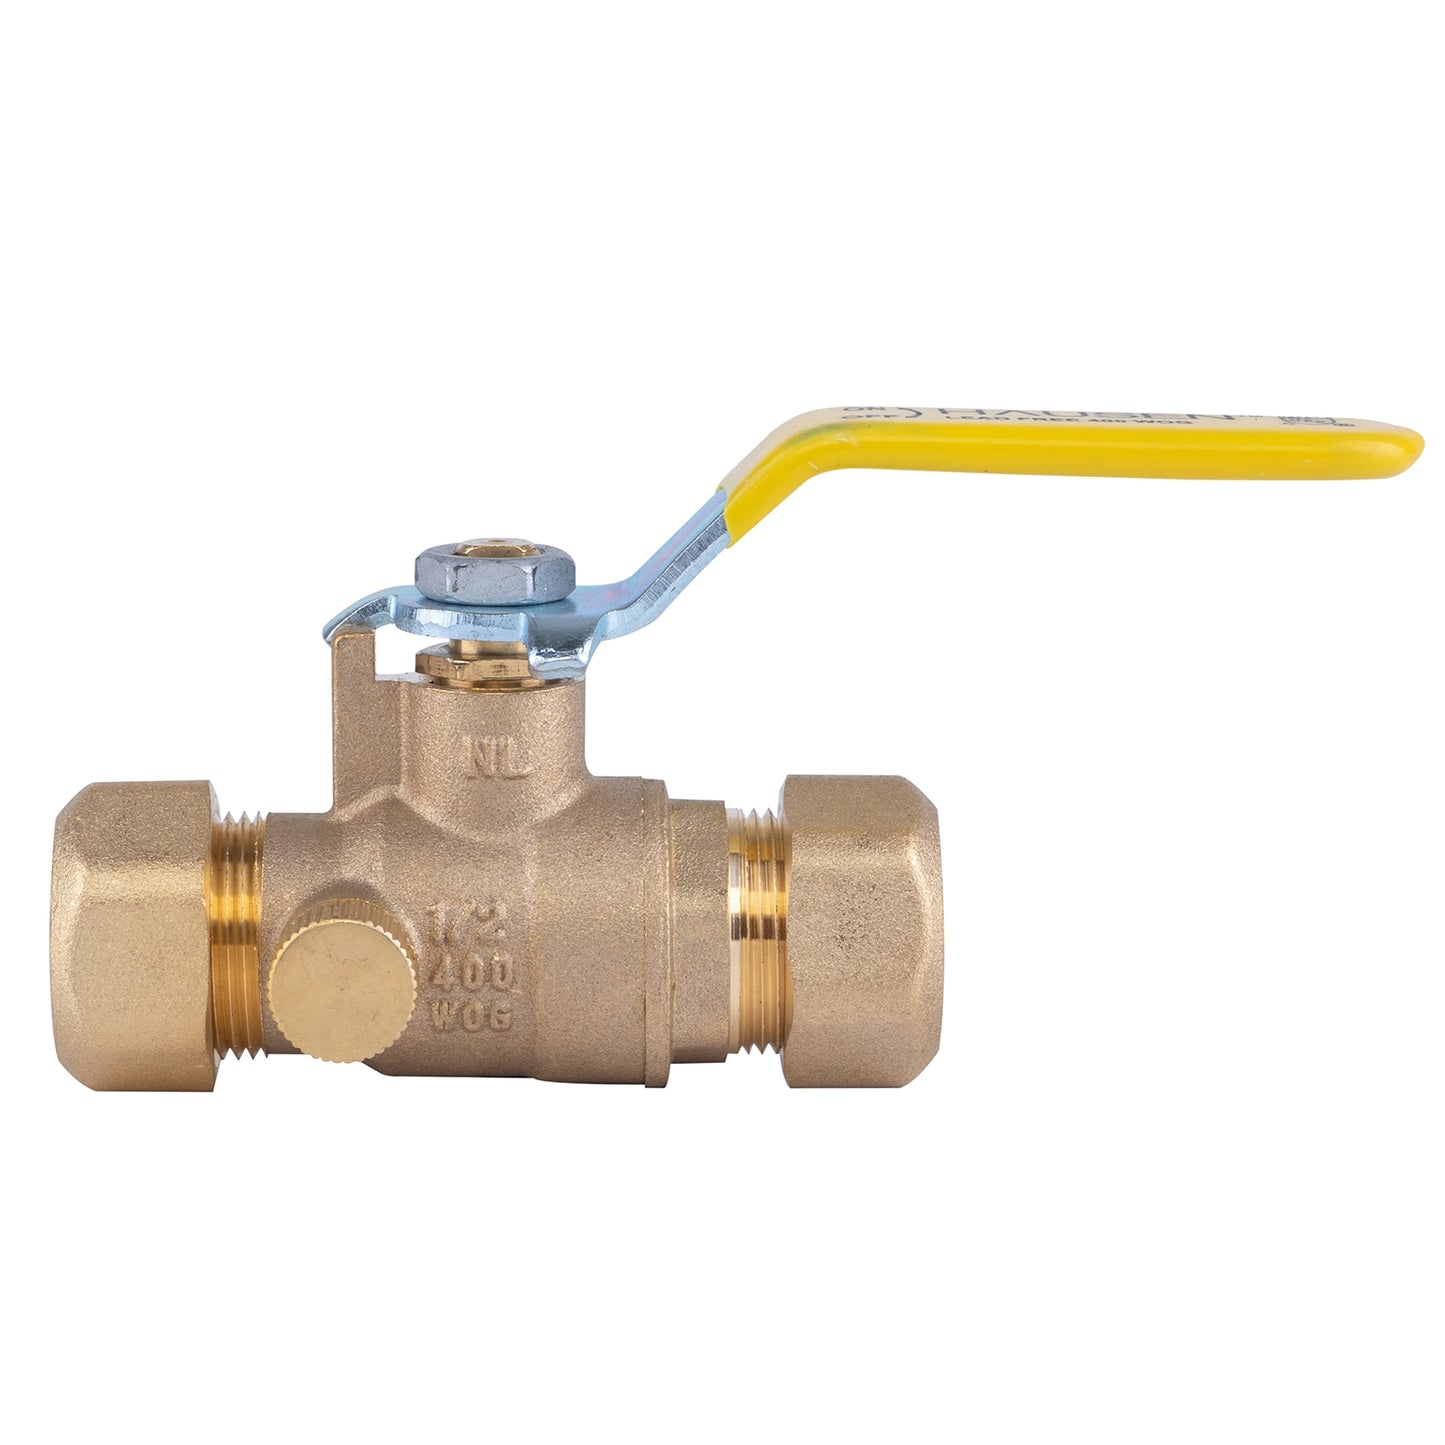 Hausen 1/2-inch Compression Standard Port Brass Ball Valve with Drain; Lead Free Forged Brass; Blowout Resistant Stem; For Use in Potable Water, Oil and Gas Distribution Systems, 10-Pack